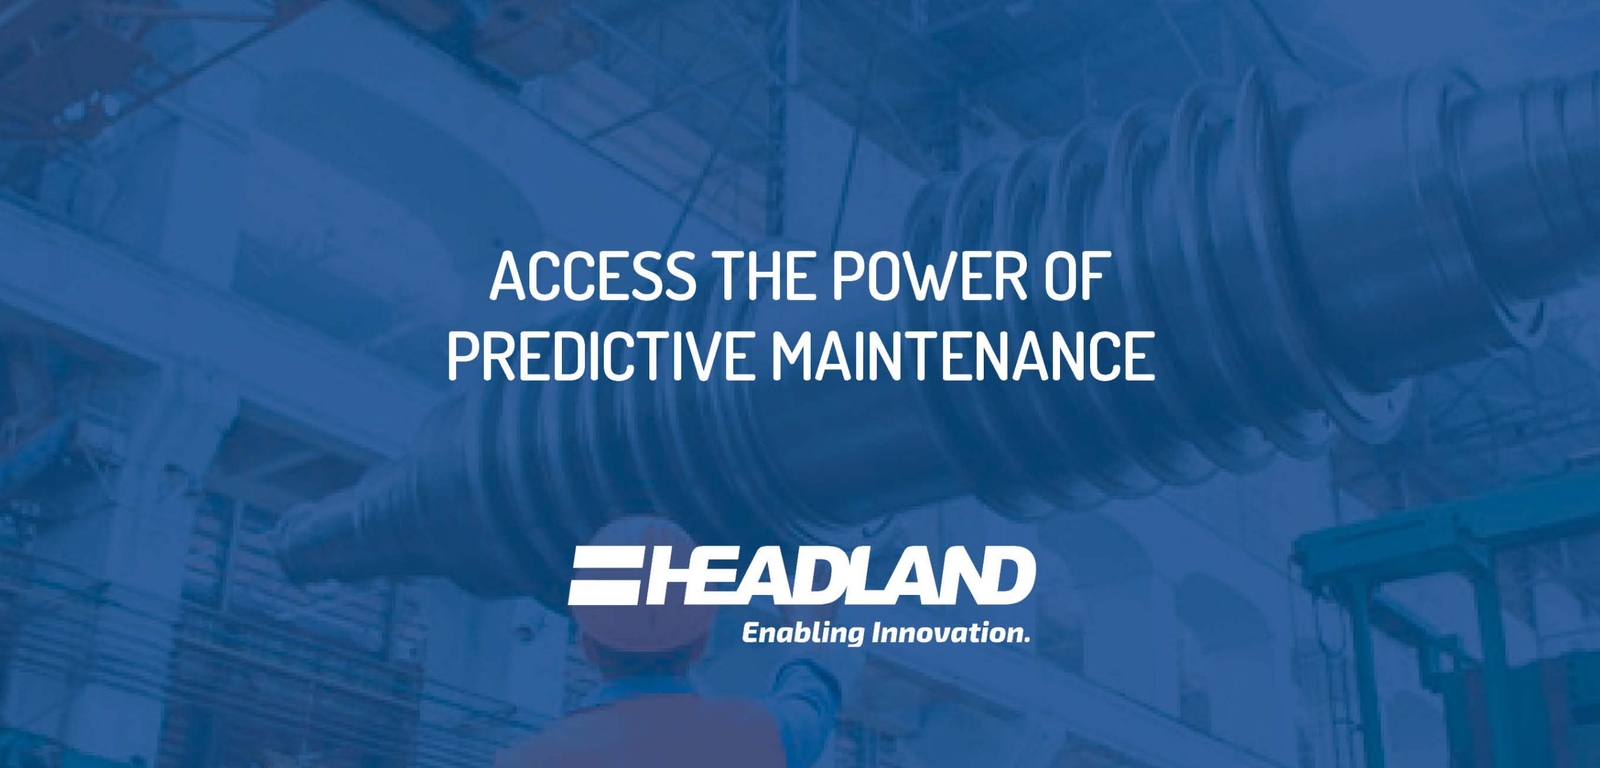 Access The Power of Predictive Maintenance